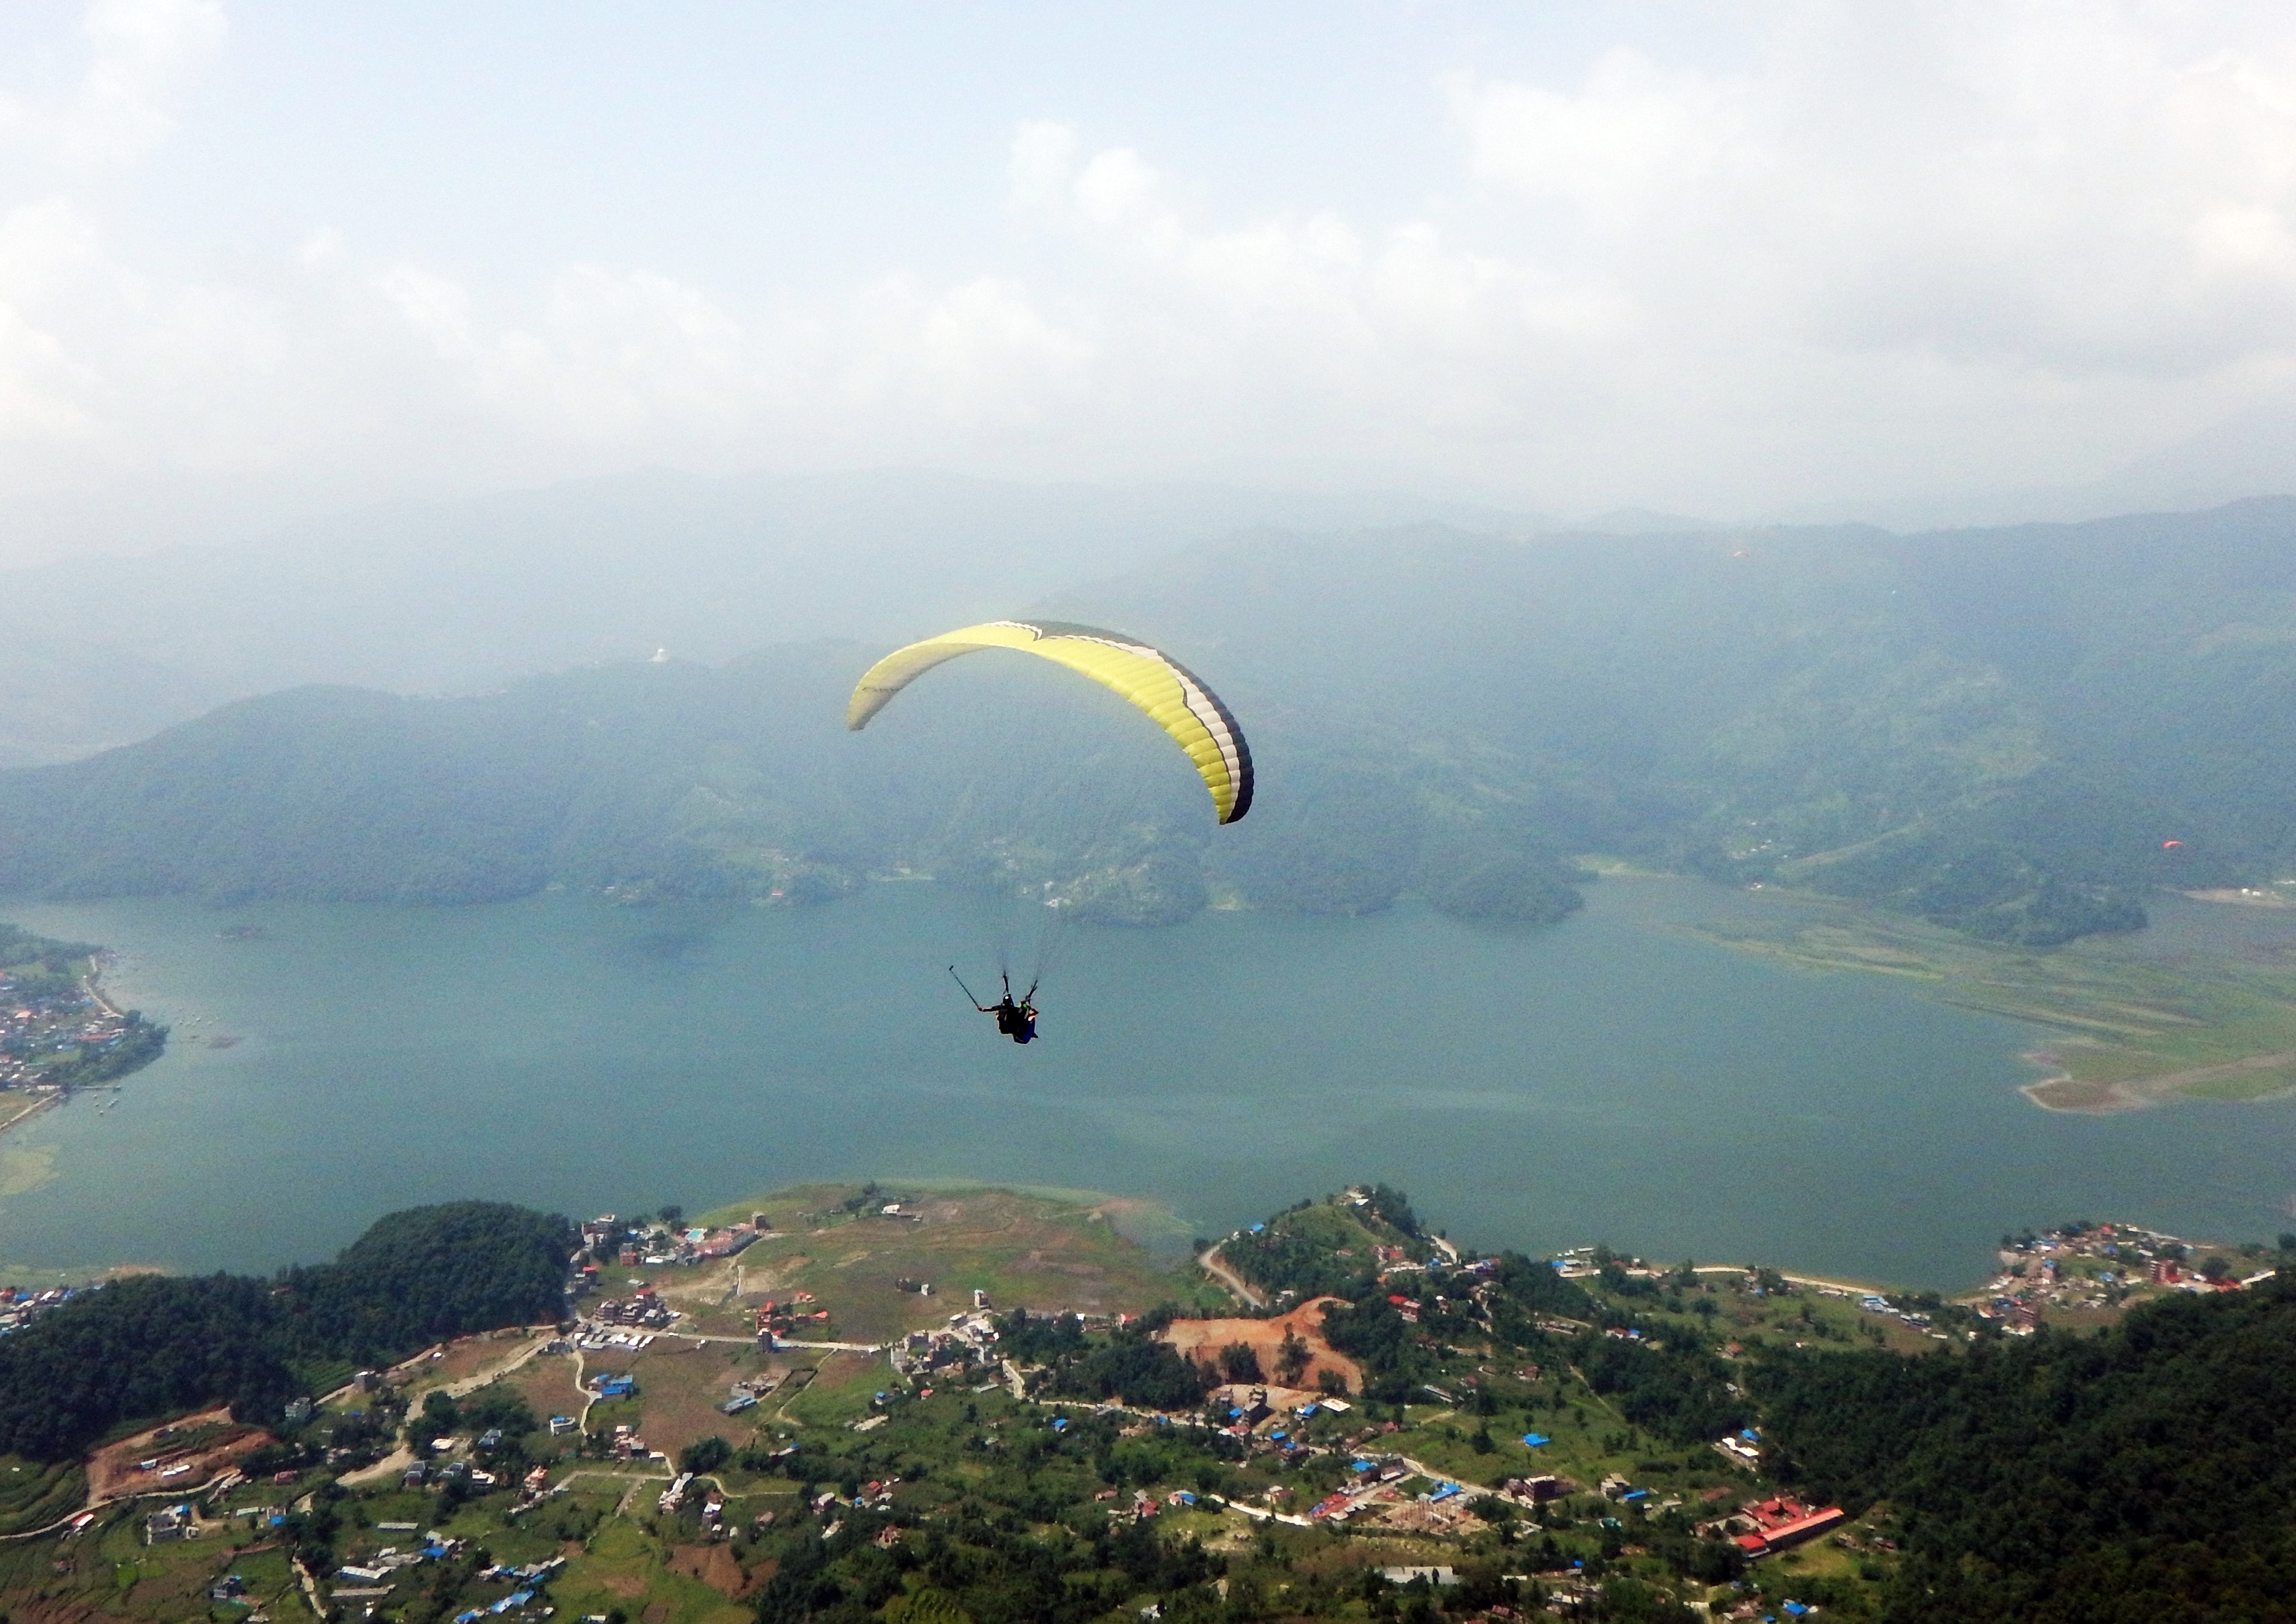 Maggie paragliding in Pokhara